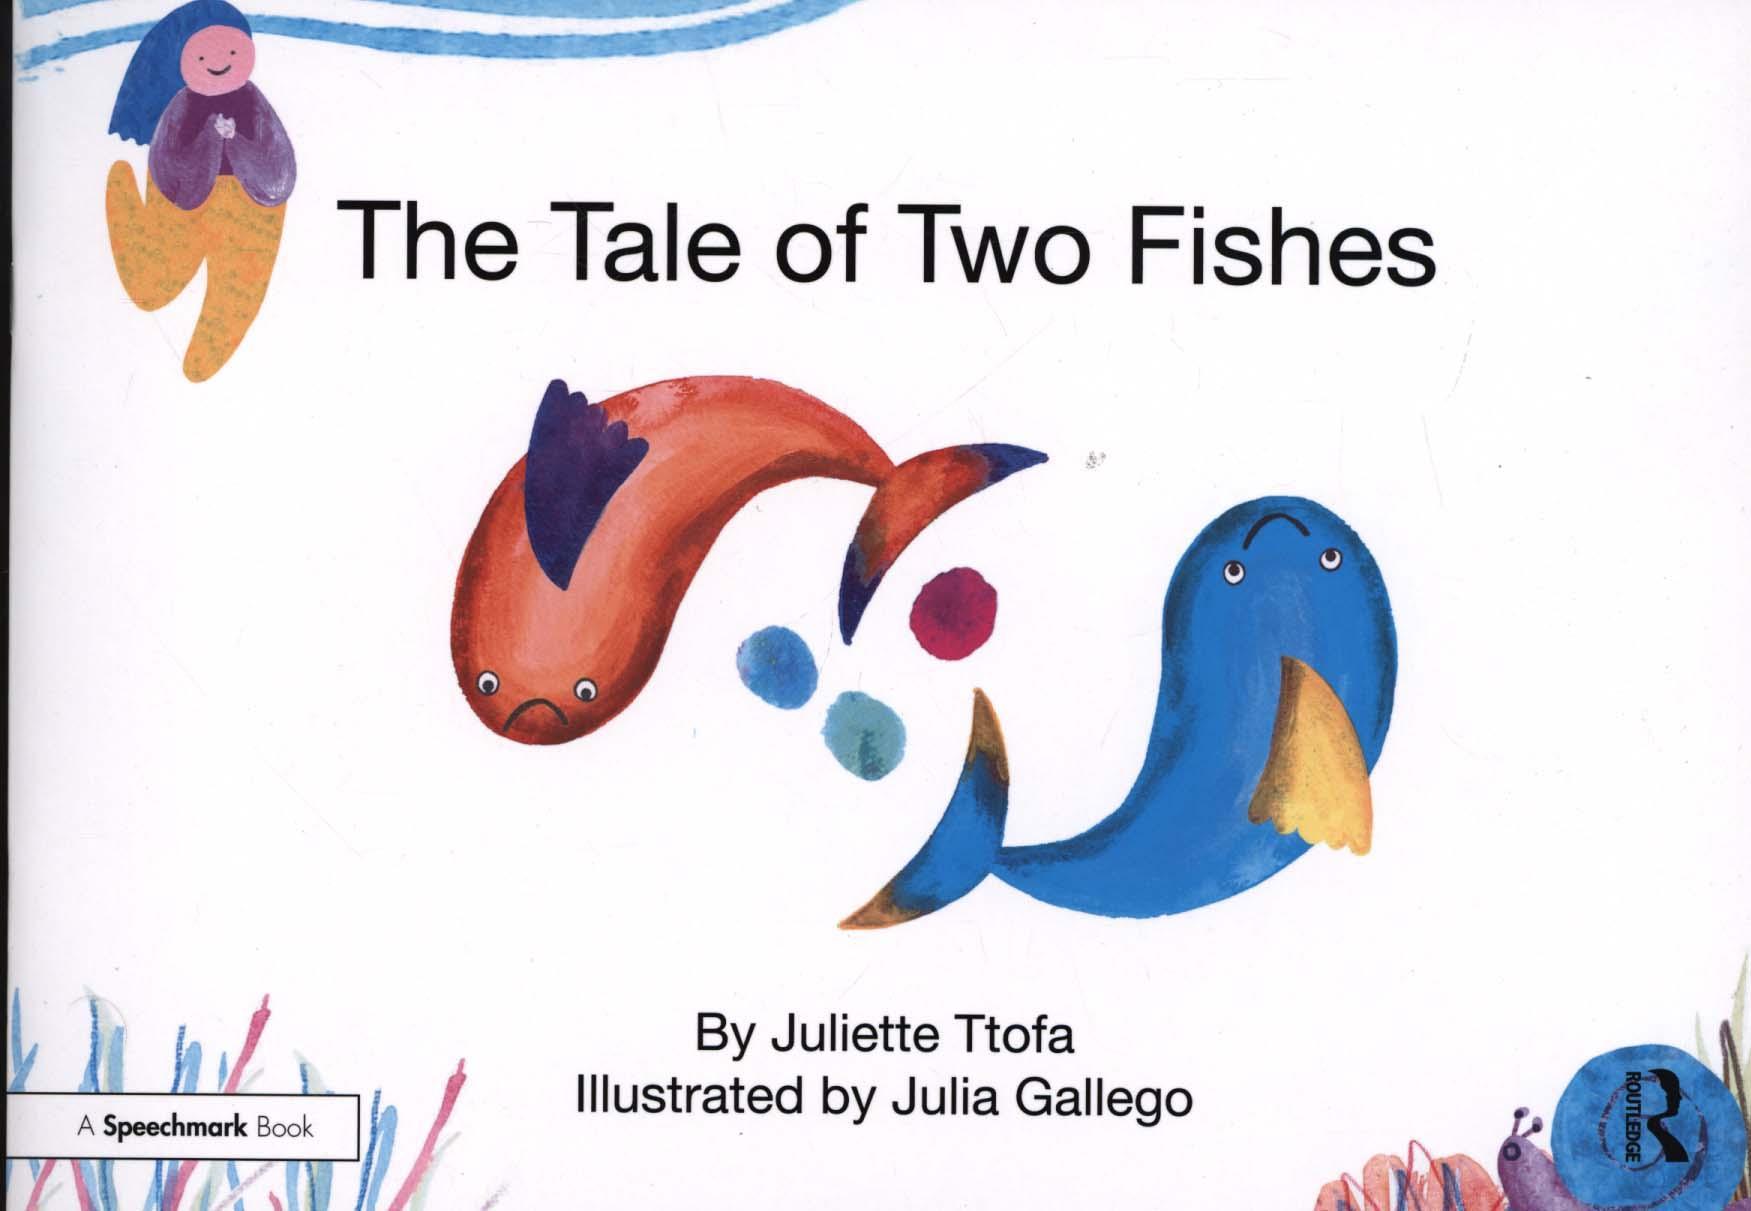 Tale of Two Fishes